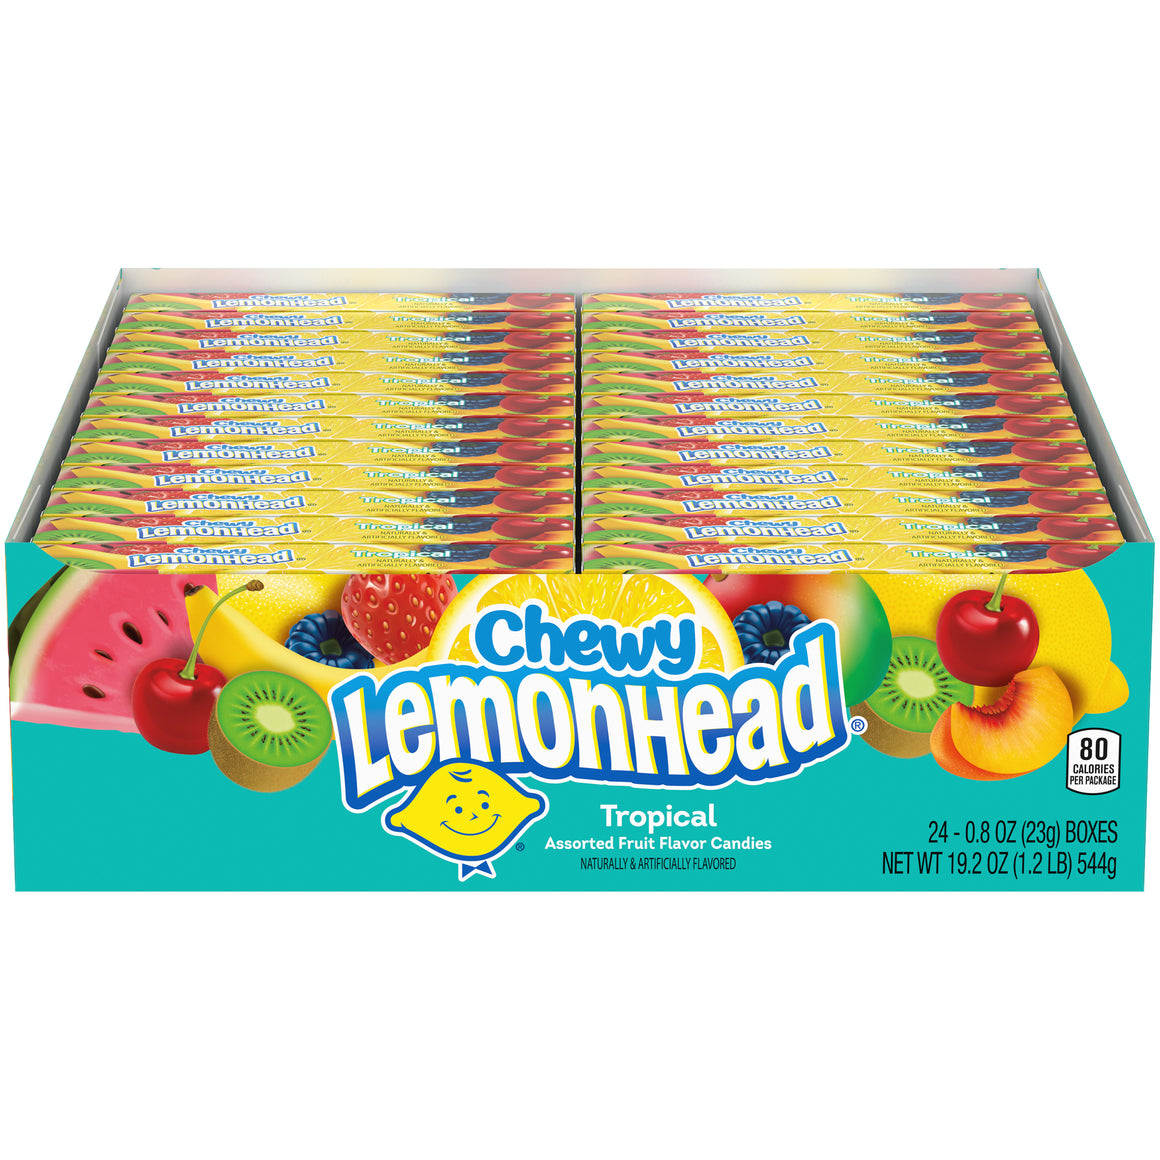 All City Candy Chewy Lemonhead Tropical Assorted Fruit Flavored Candies .8-oz. Box 1 Box Chewy Ferrara Candy Company For fresh candy and great service, visit www.allcitycandy.com